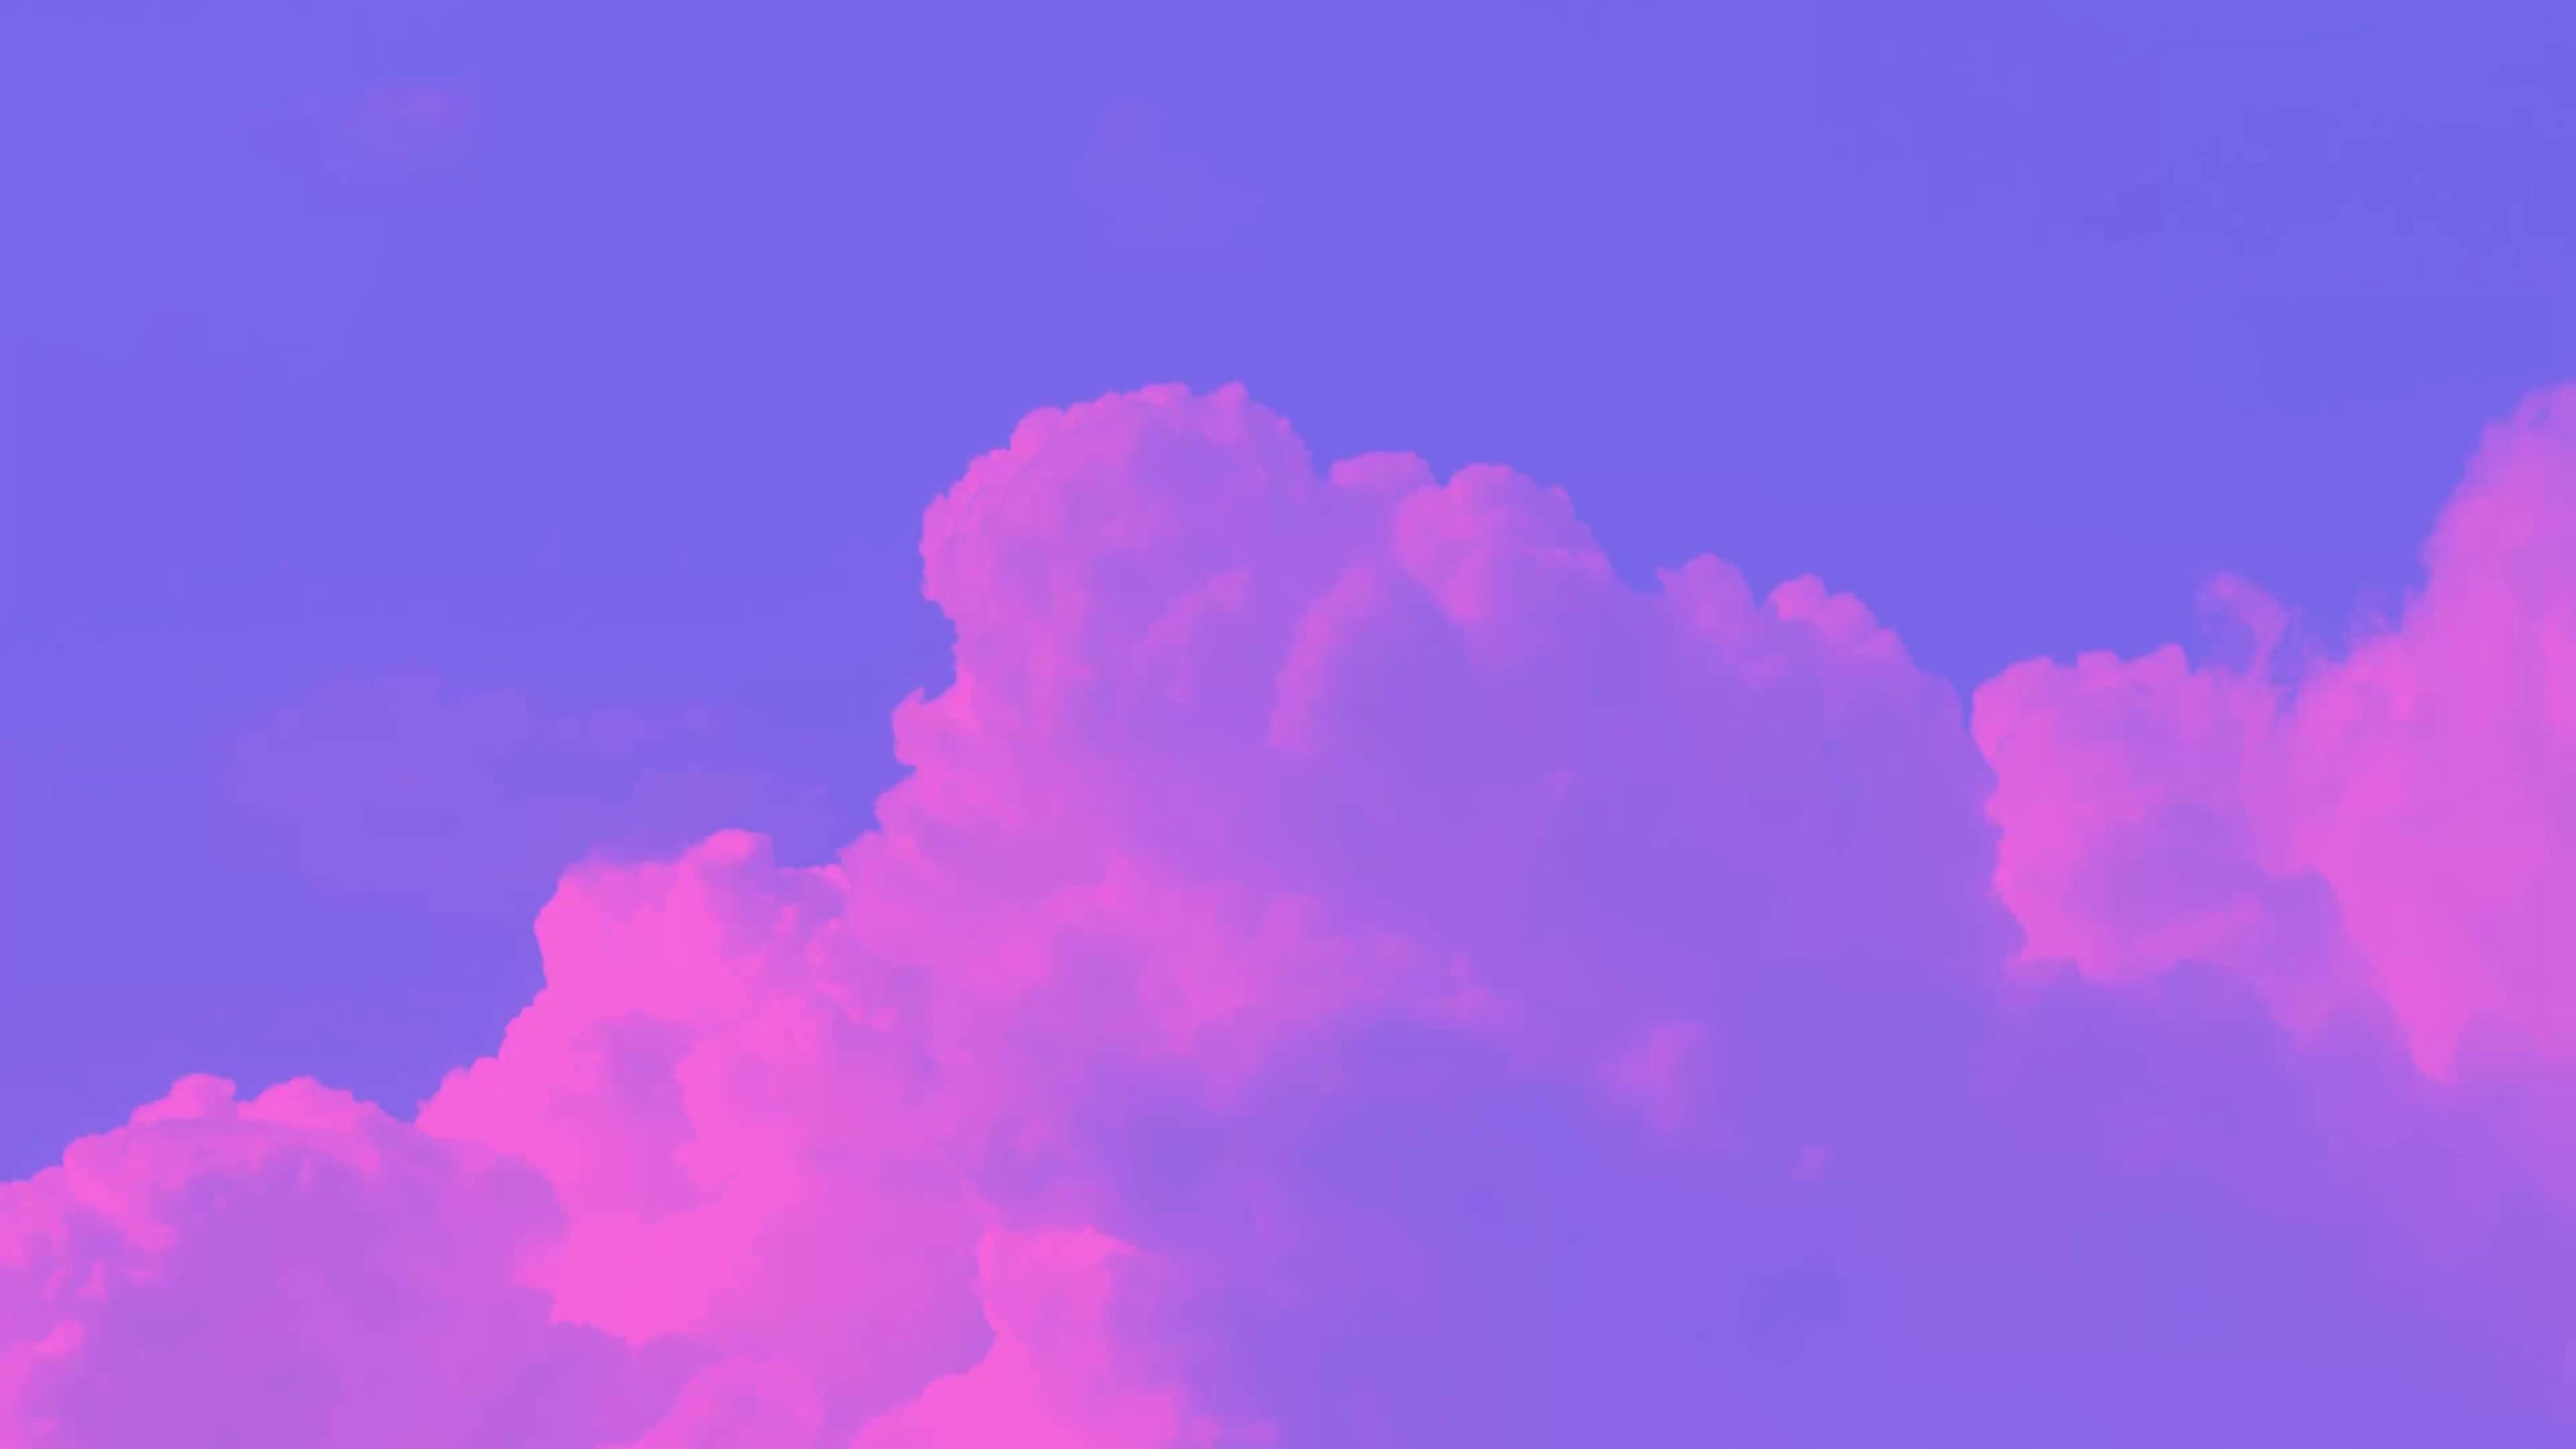 A purple and pink sky with clouds - Windows 10